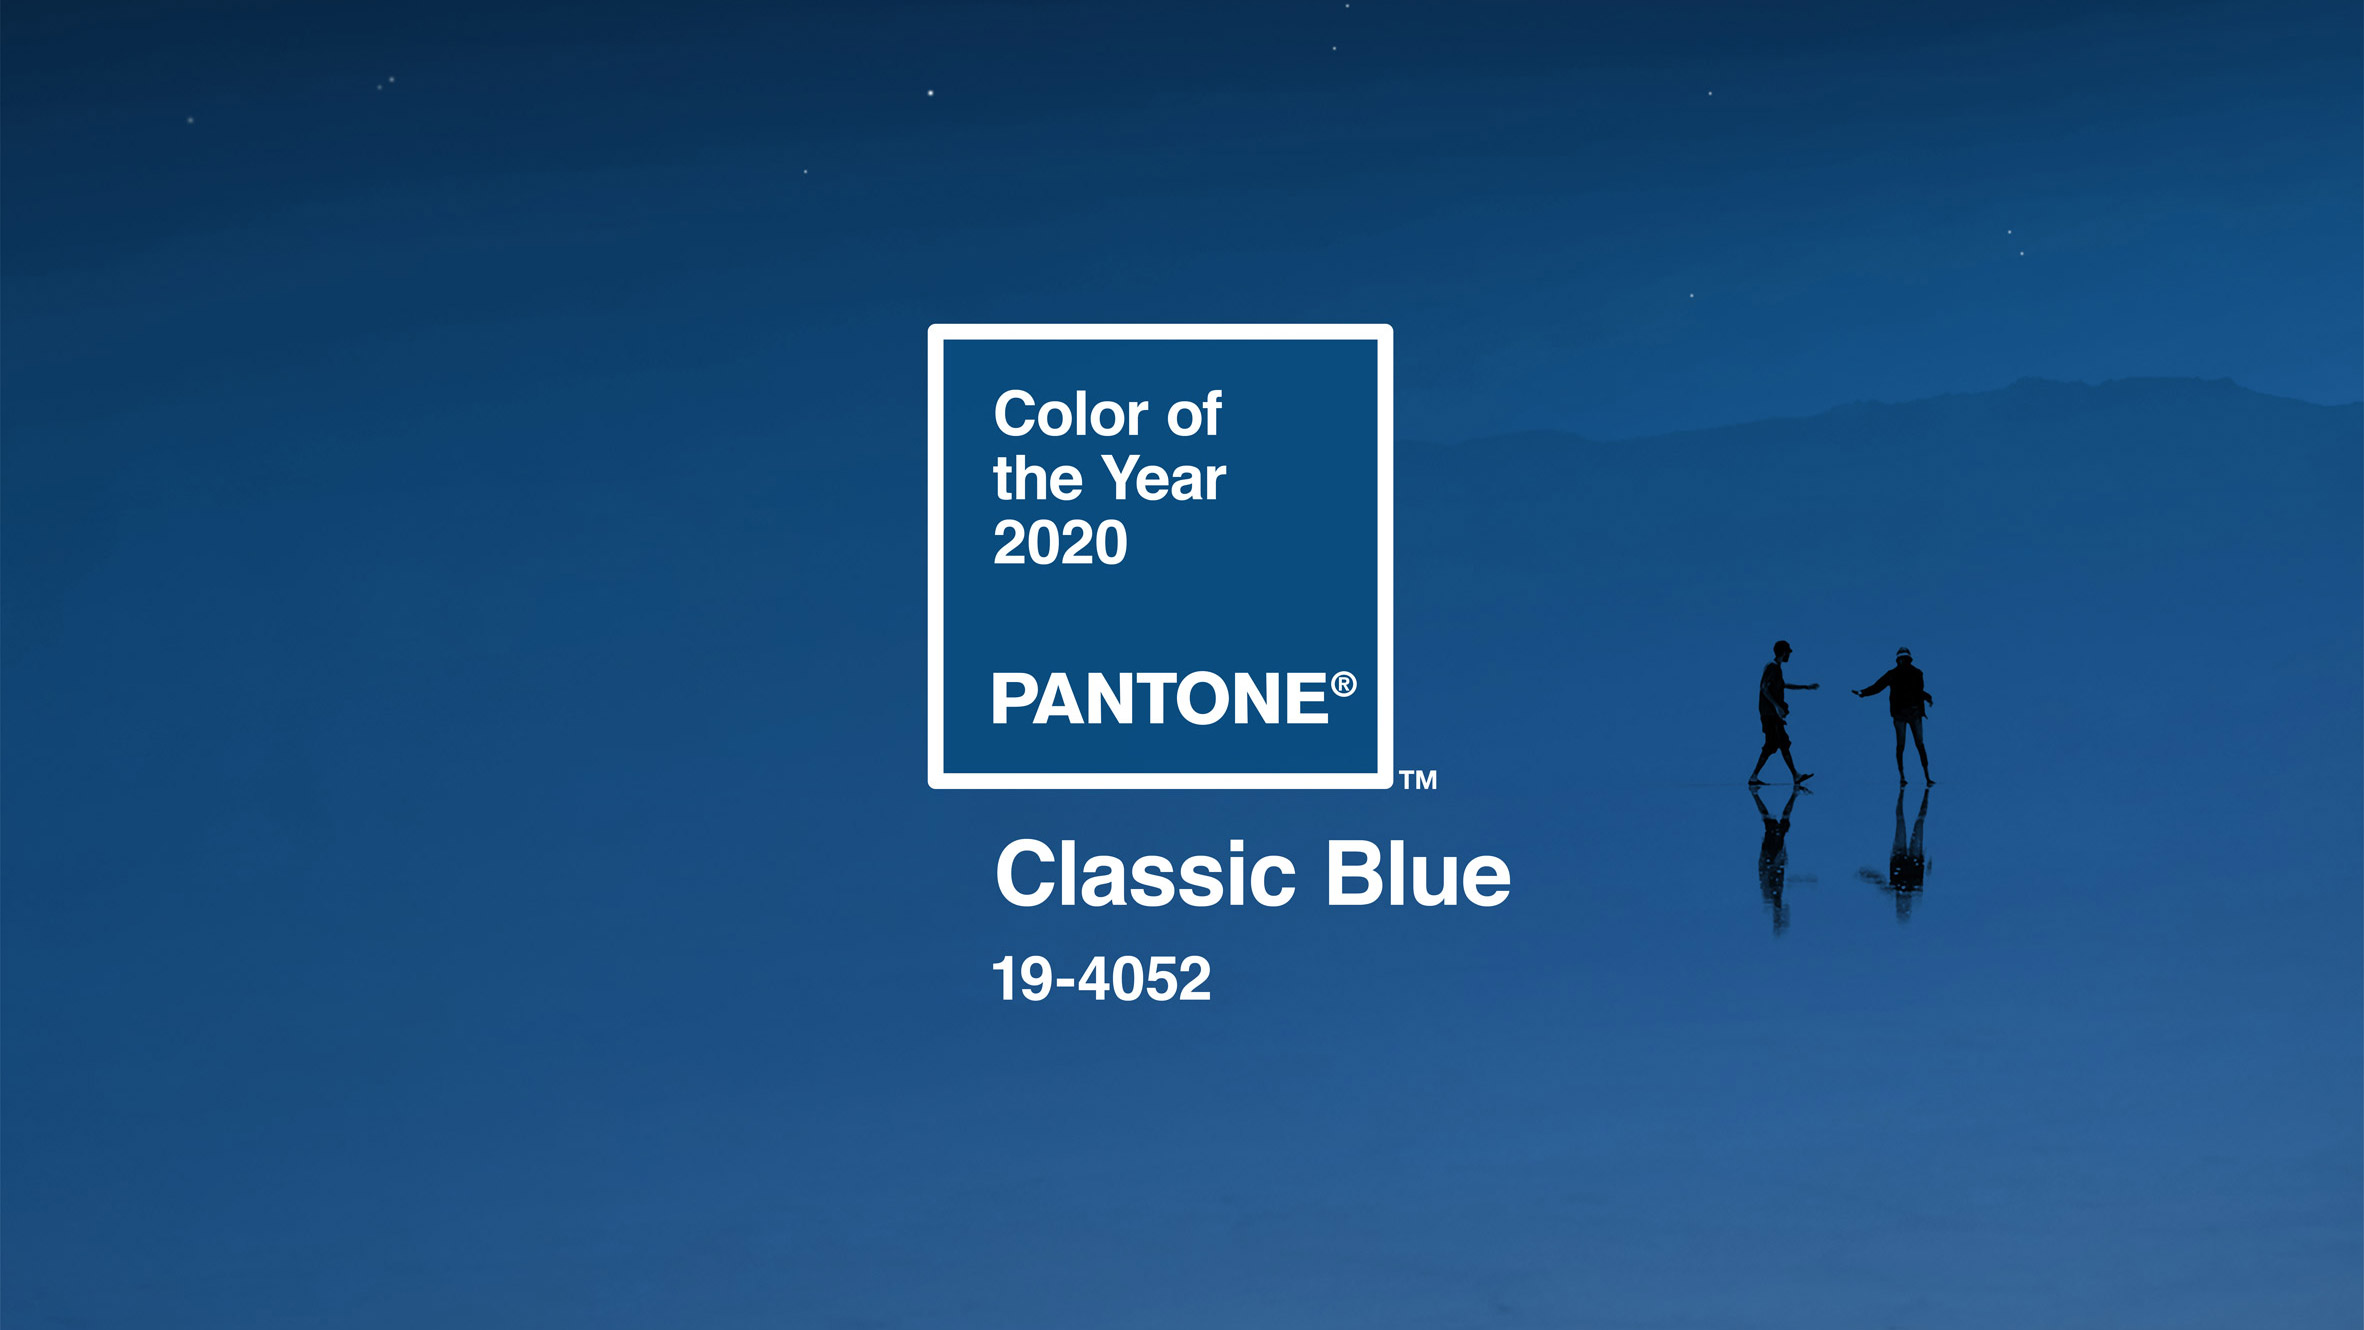 Colour of the year 2020